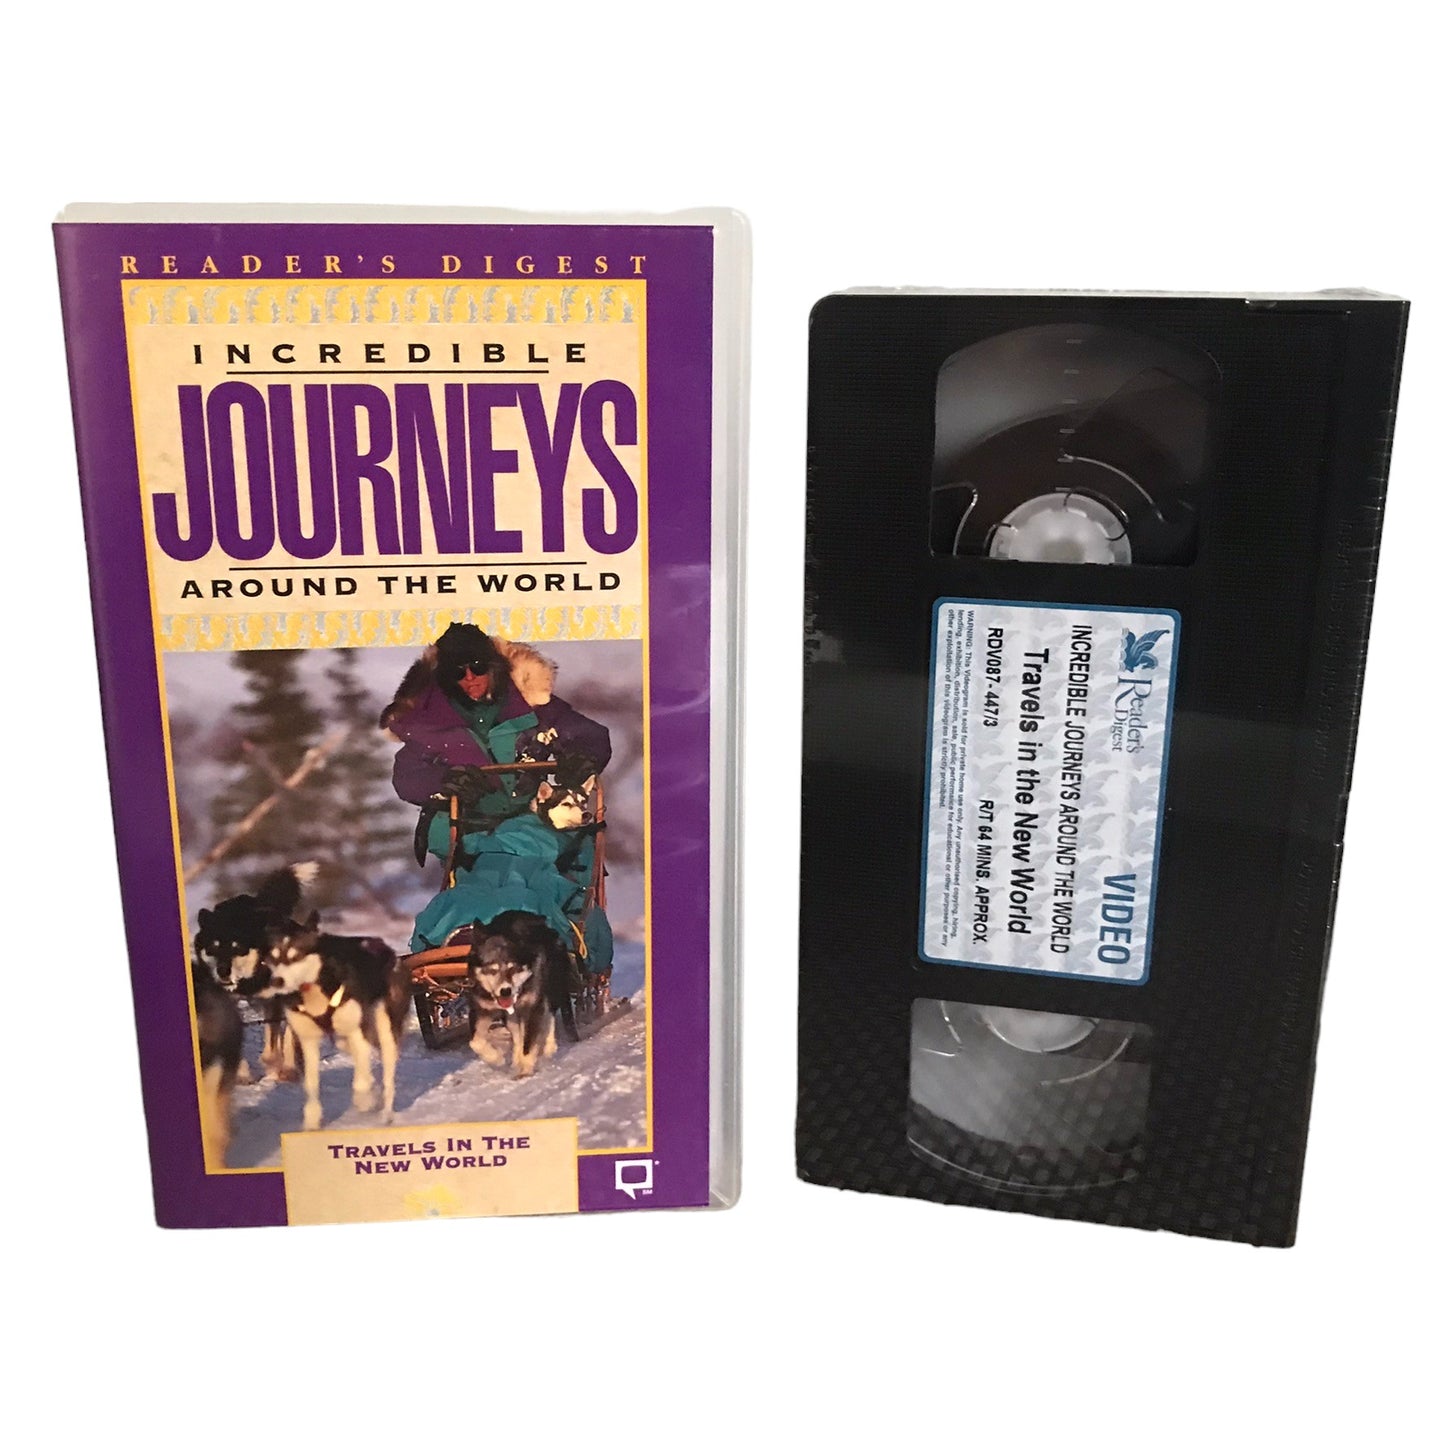 Incredible Journey Around The World - Travels in The new World - Reader's Digest - Drama - Pal - VHS-